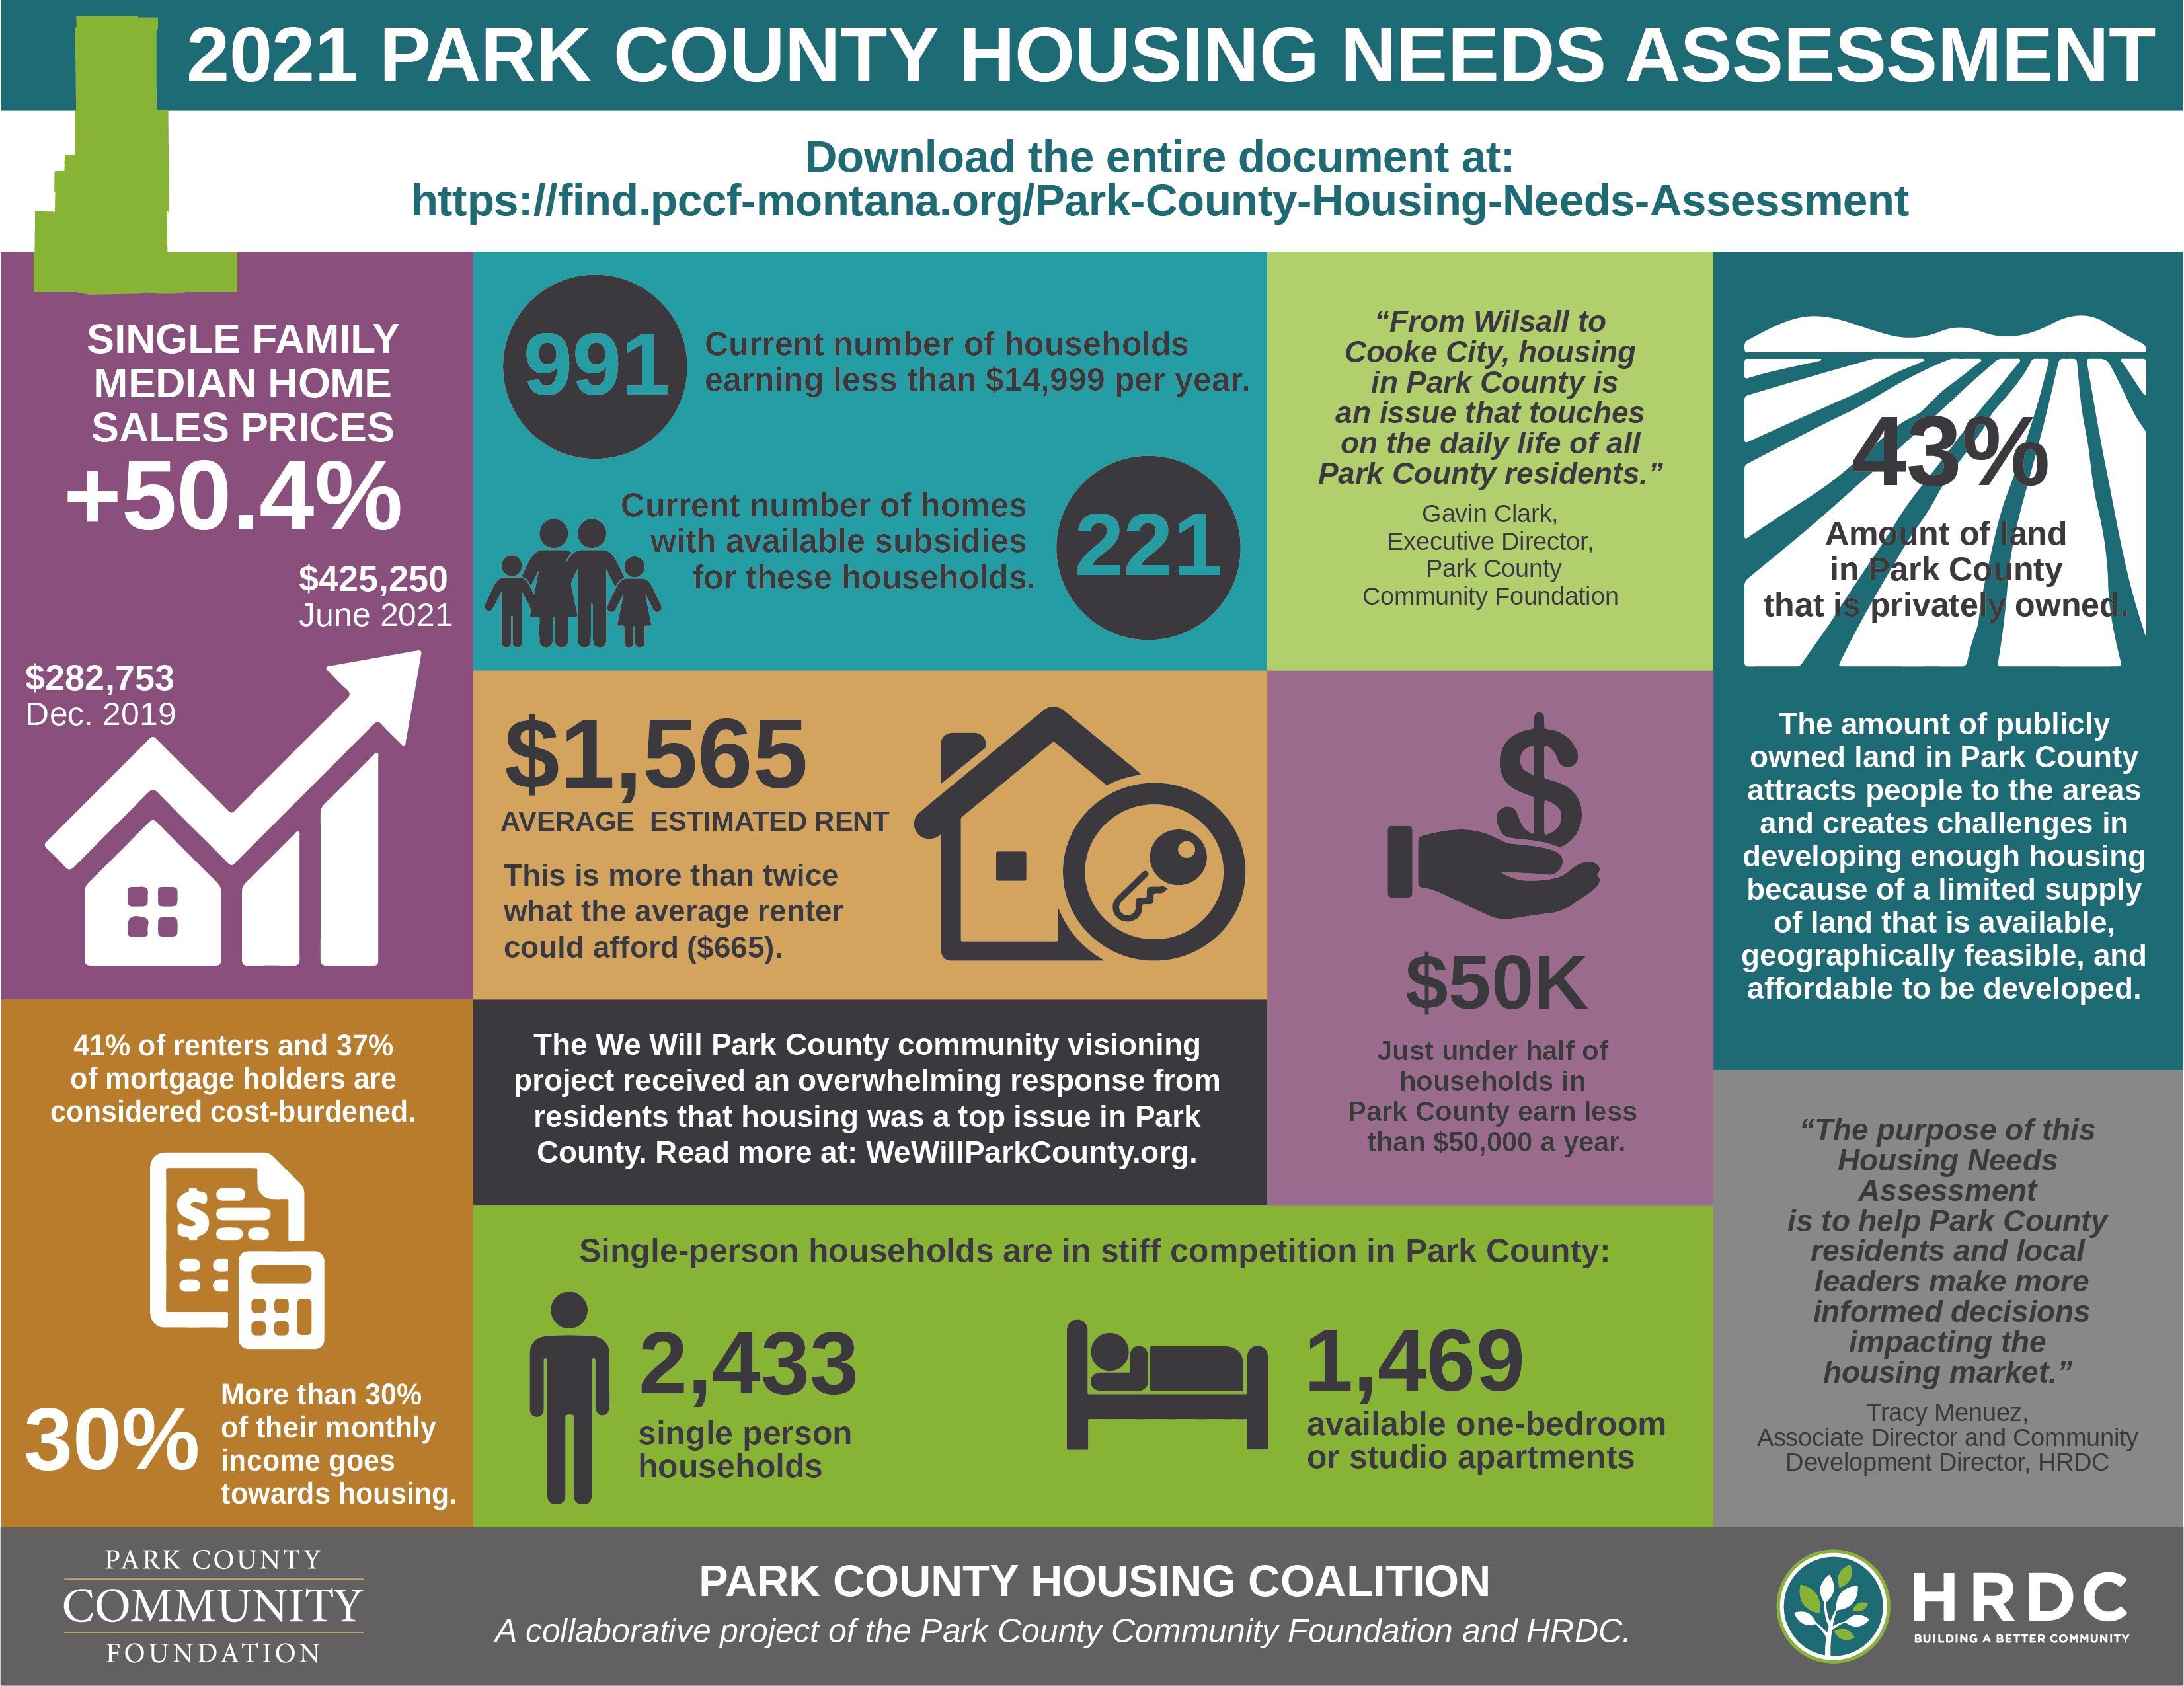 Housing Coalition releases 2021 Housing Needs Assessment